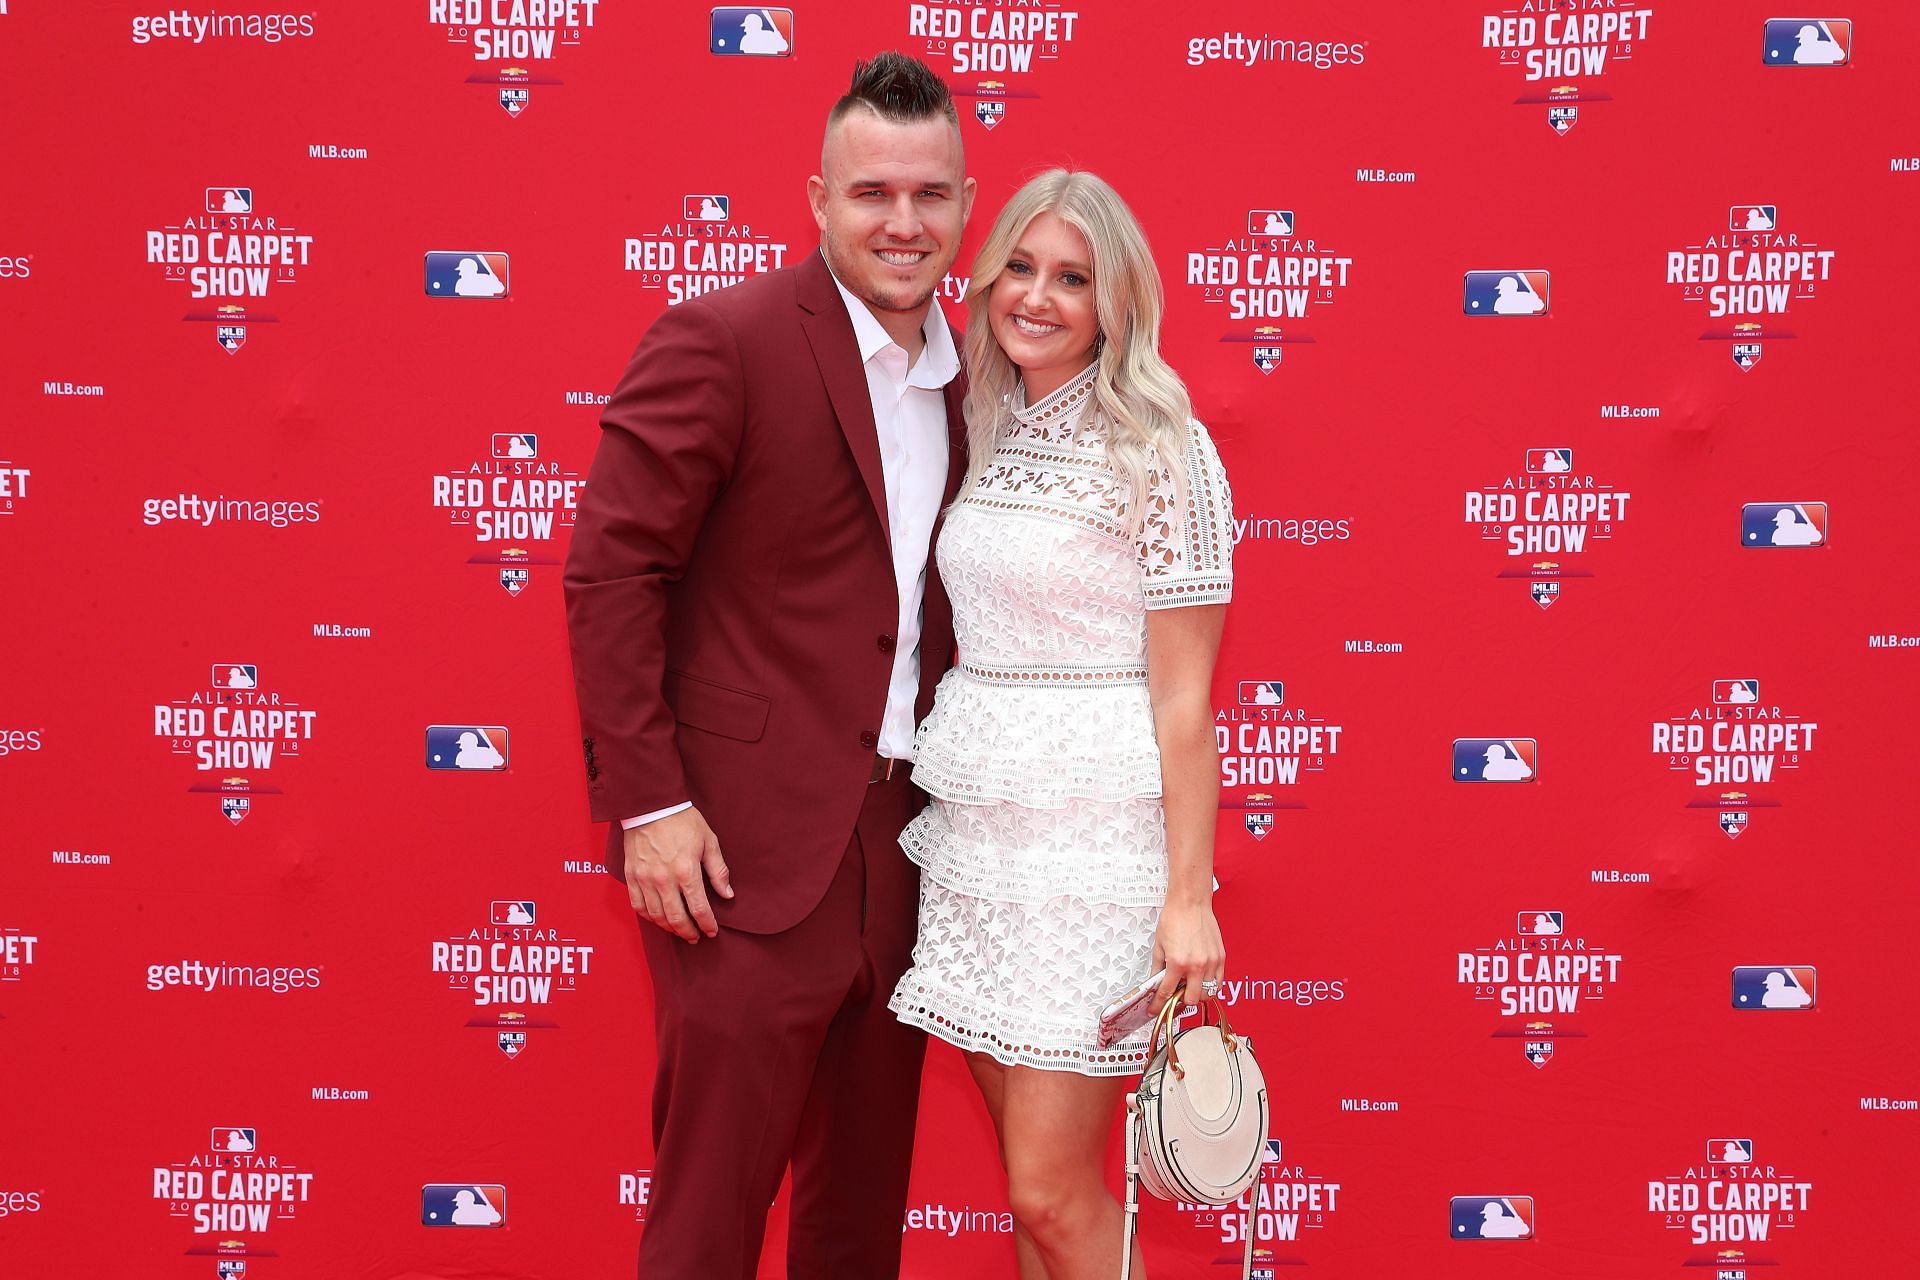 89th MLB All-Star Game, presented by MasterCard - Red Carpet